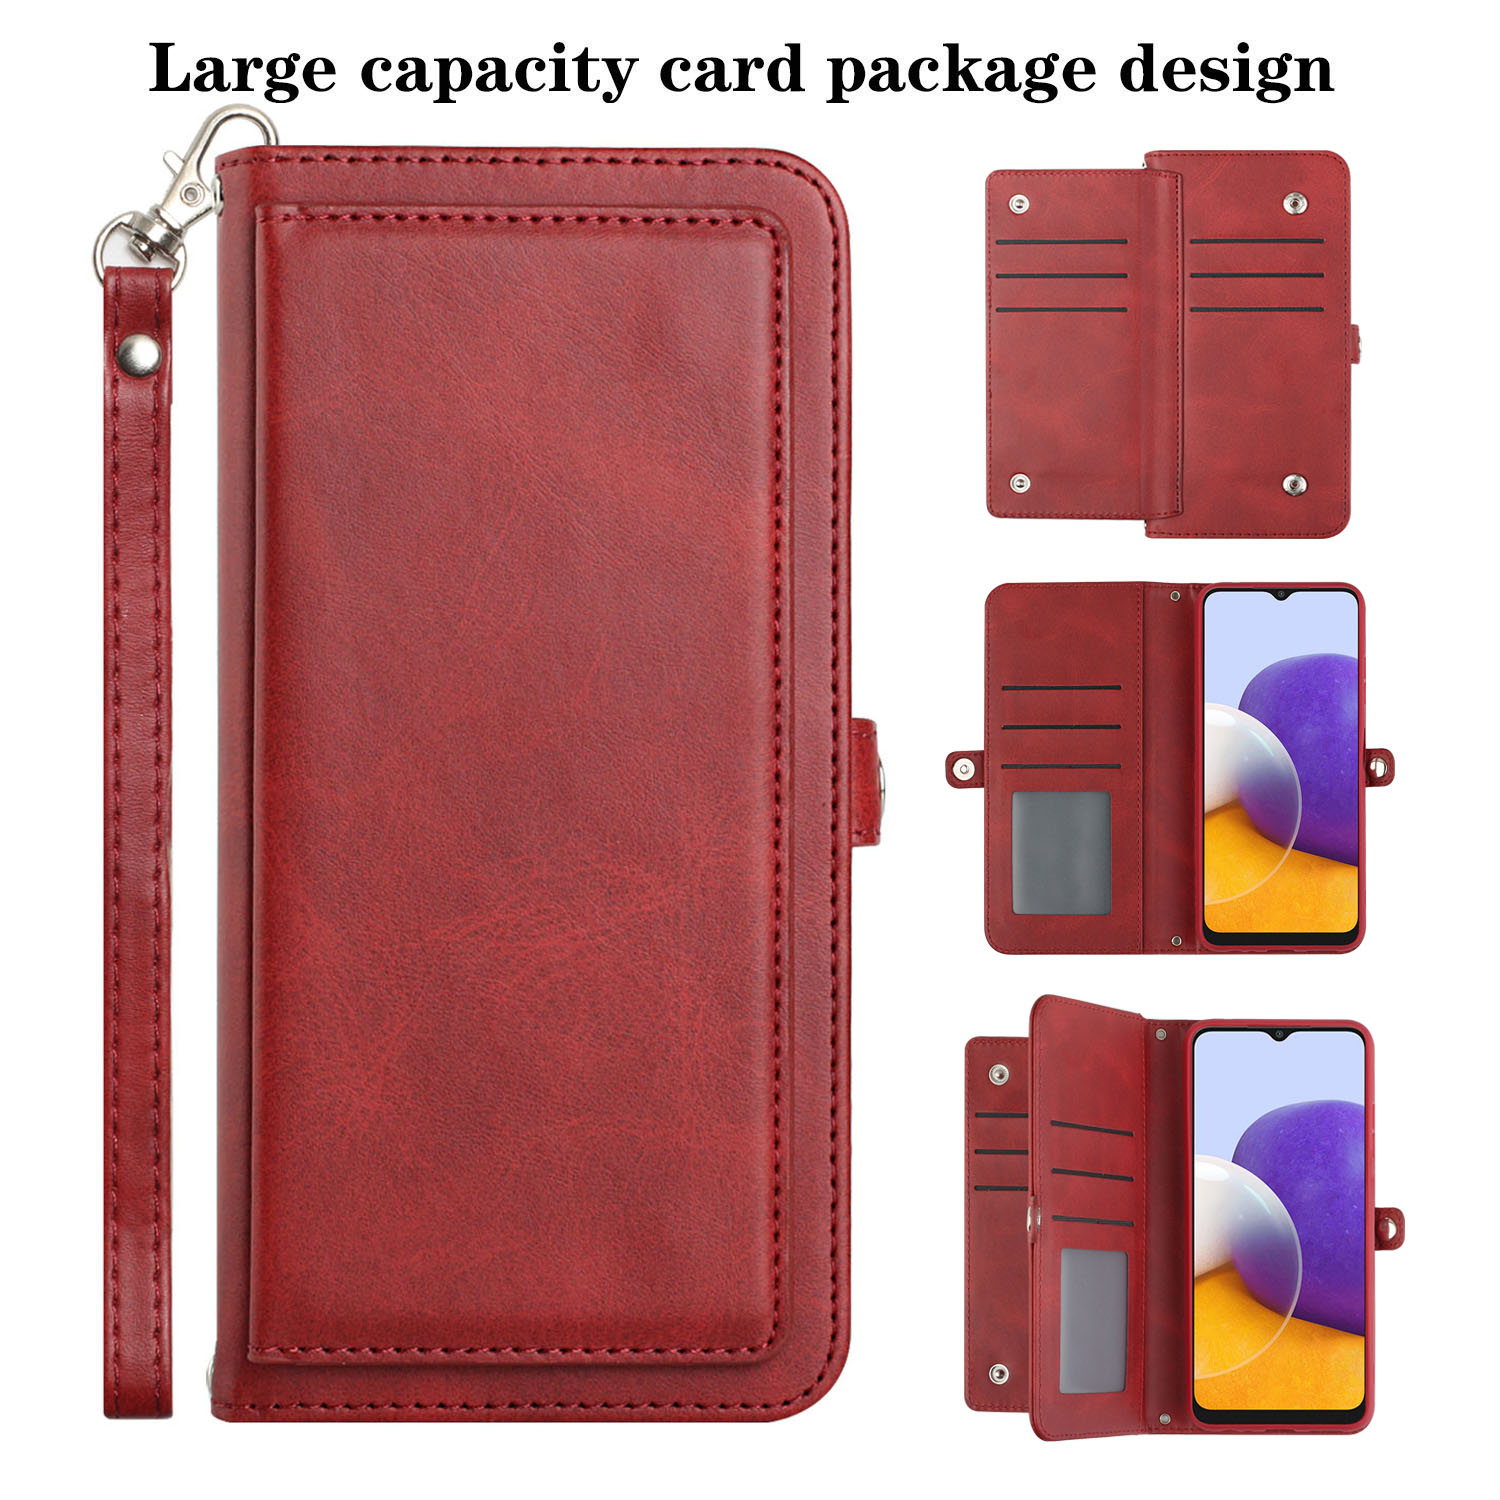 Premium PU Leather Folio WALLET Front Cover Case for Galaxy A22 5G (Red)